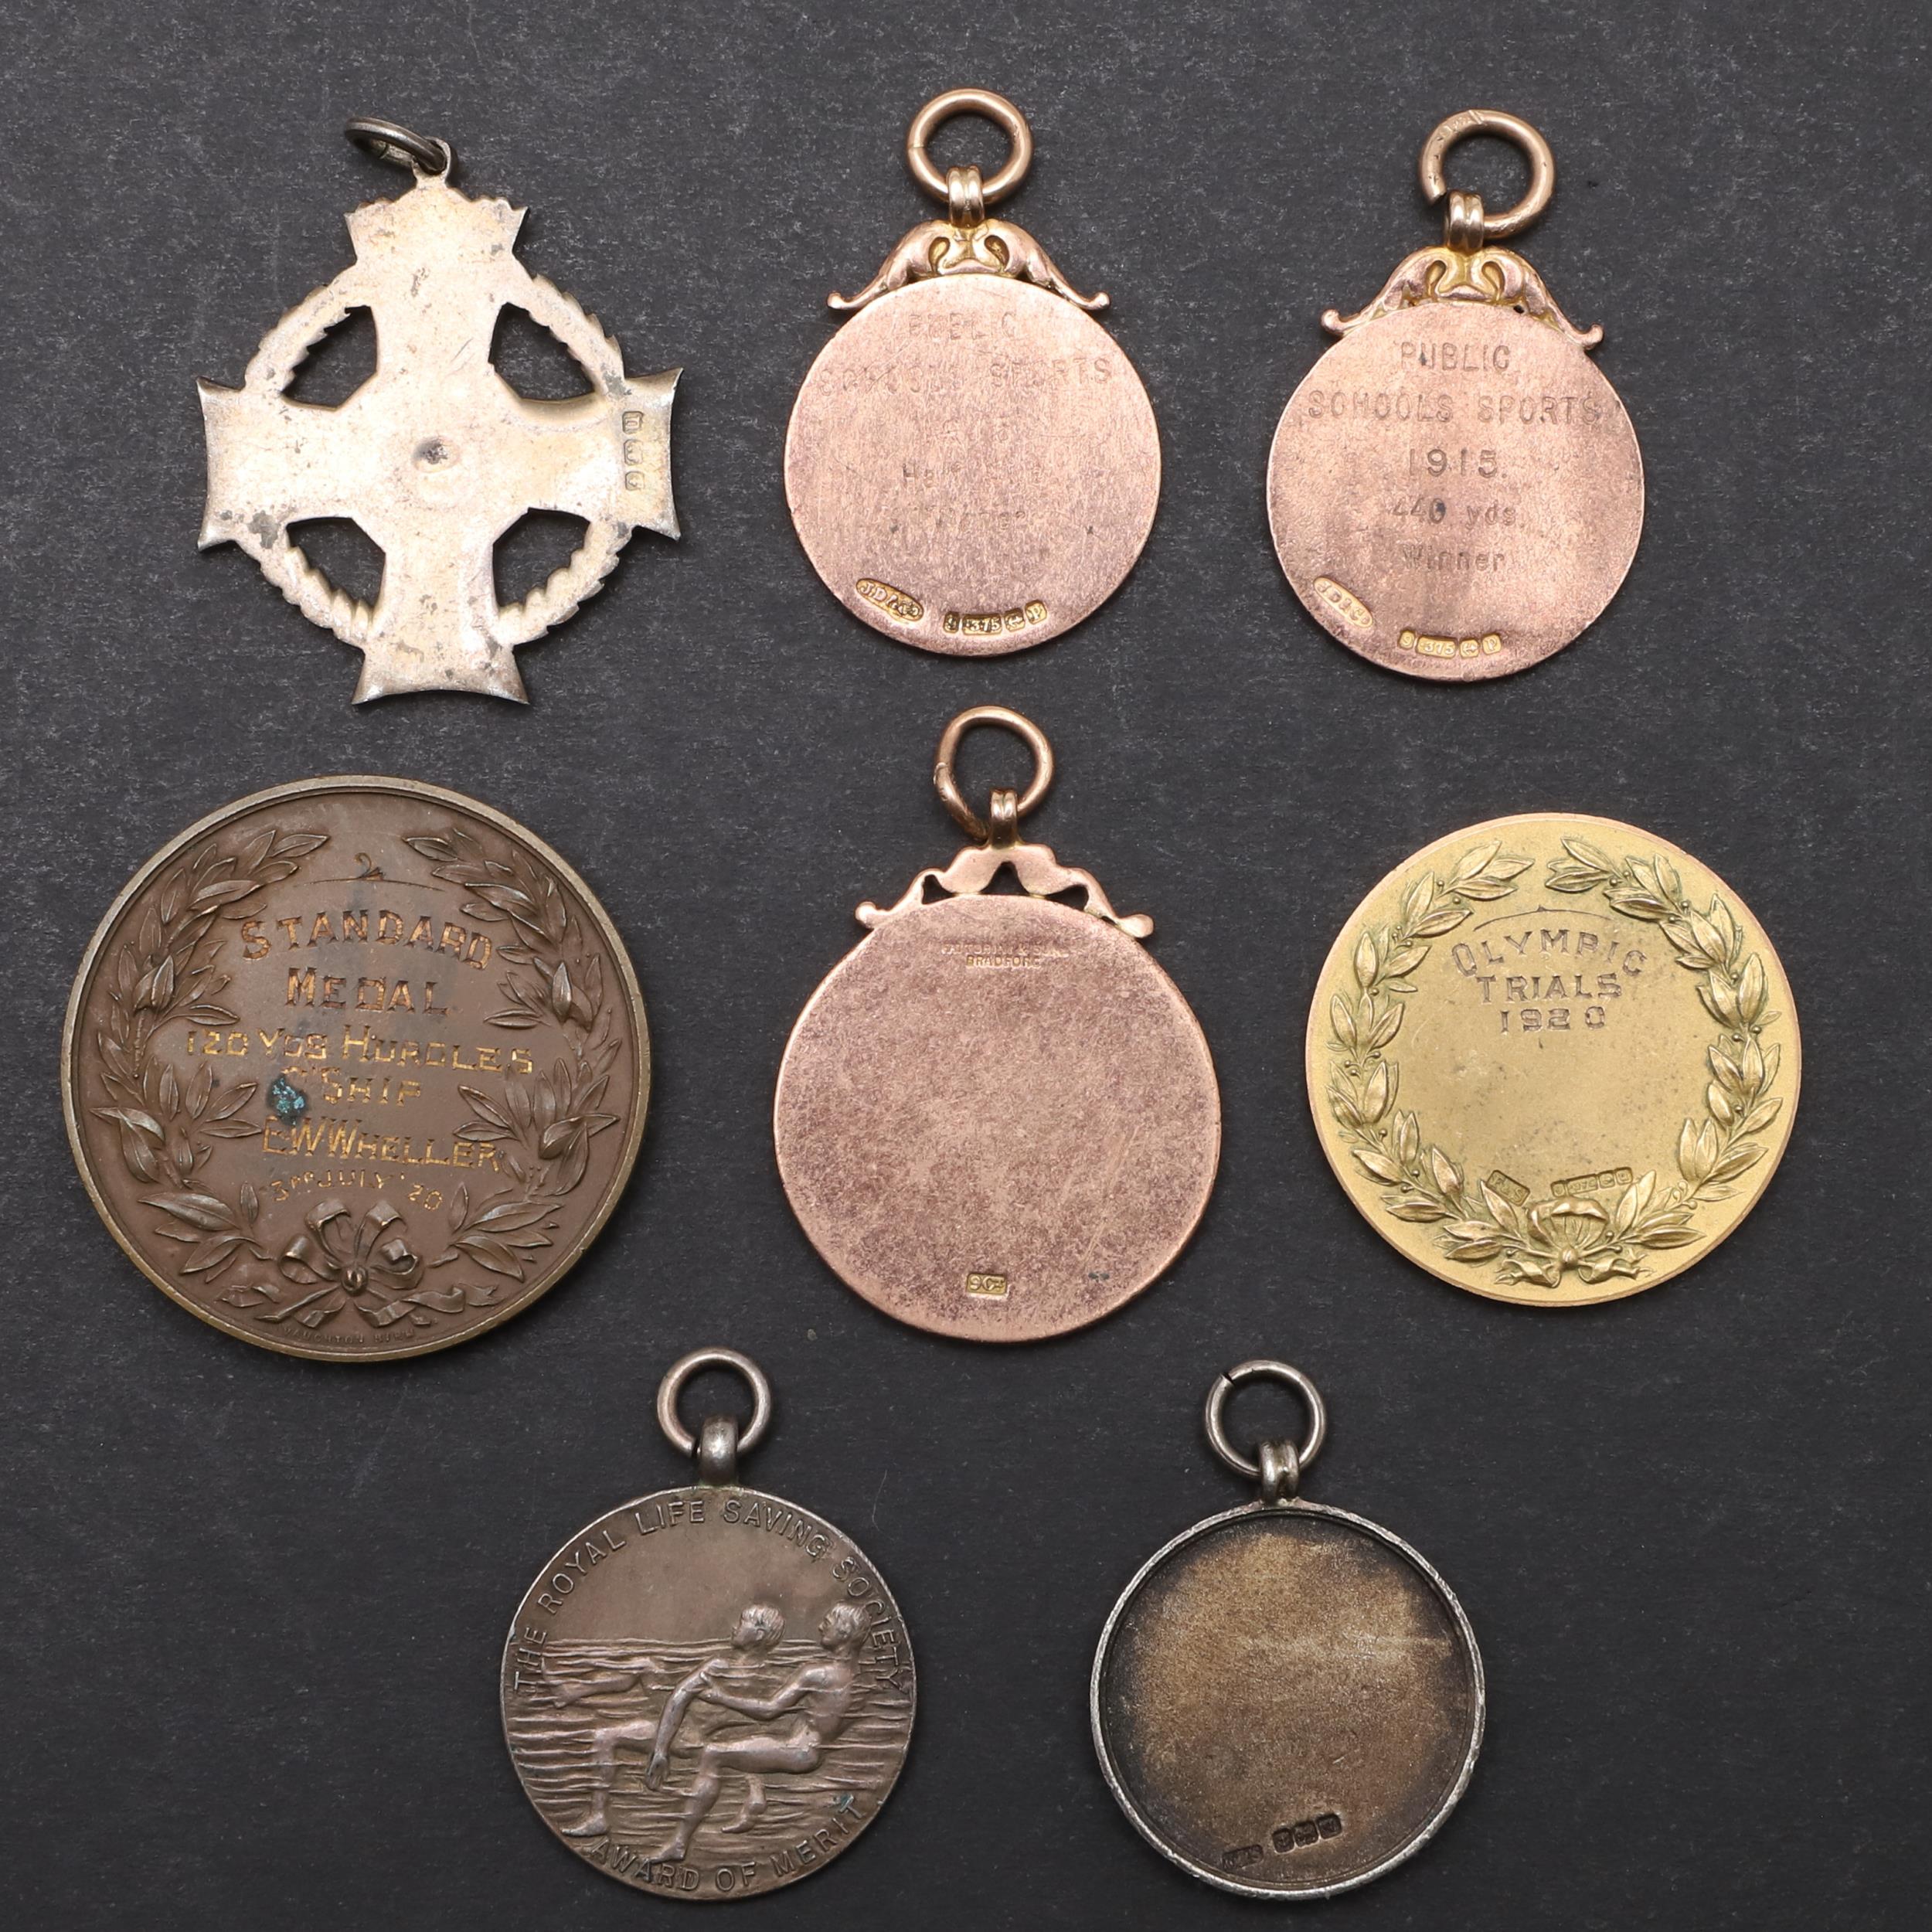 A COLLECTION OF GOLD AND SILVER SPORTING MEDALS TO INCLUDE A 1920'S OLYMPIC TRIALS MEDAL. - Image 5 of 8